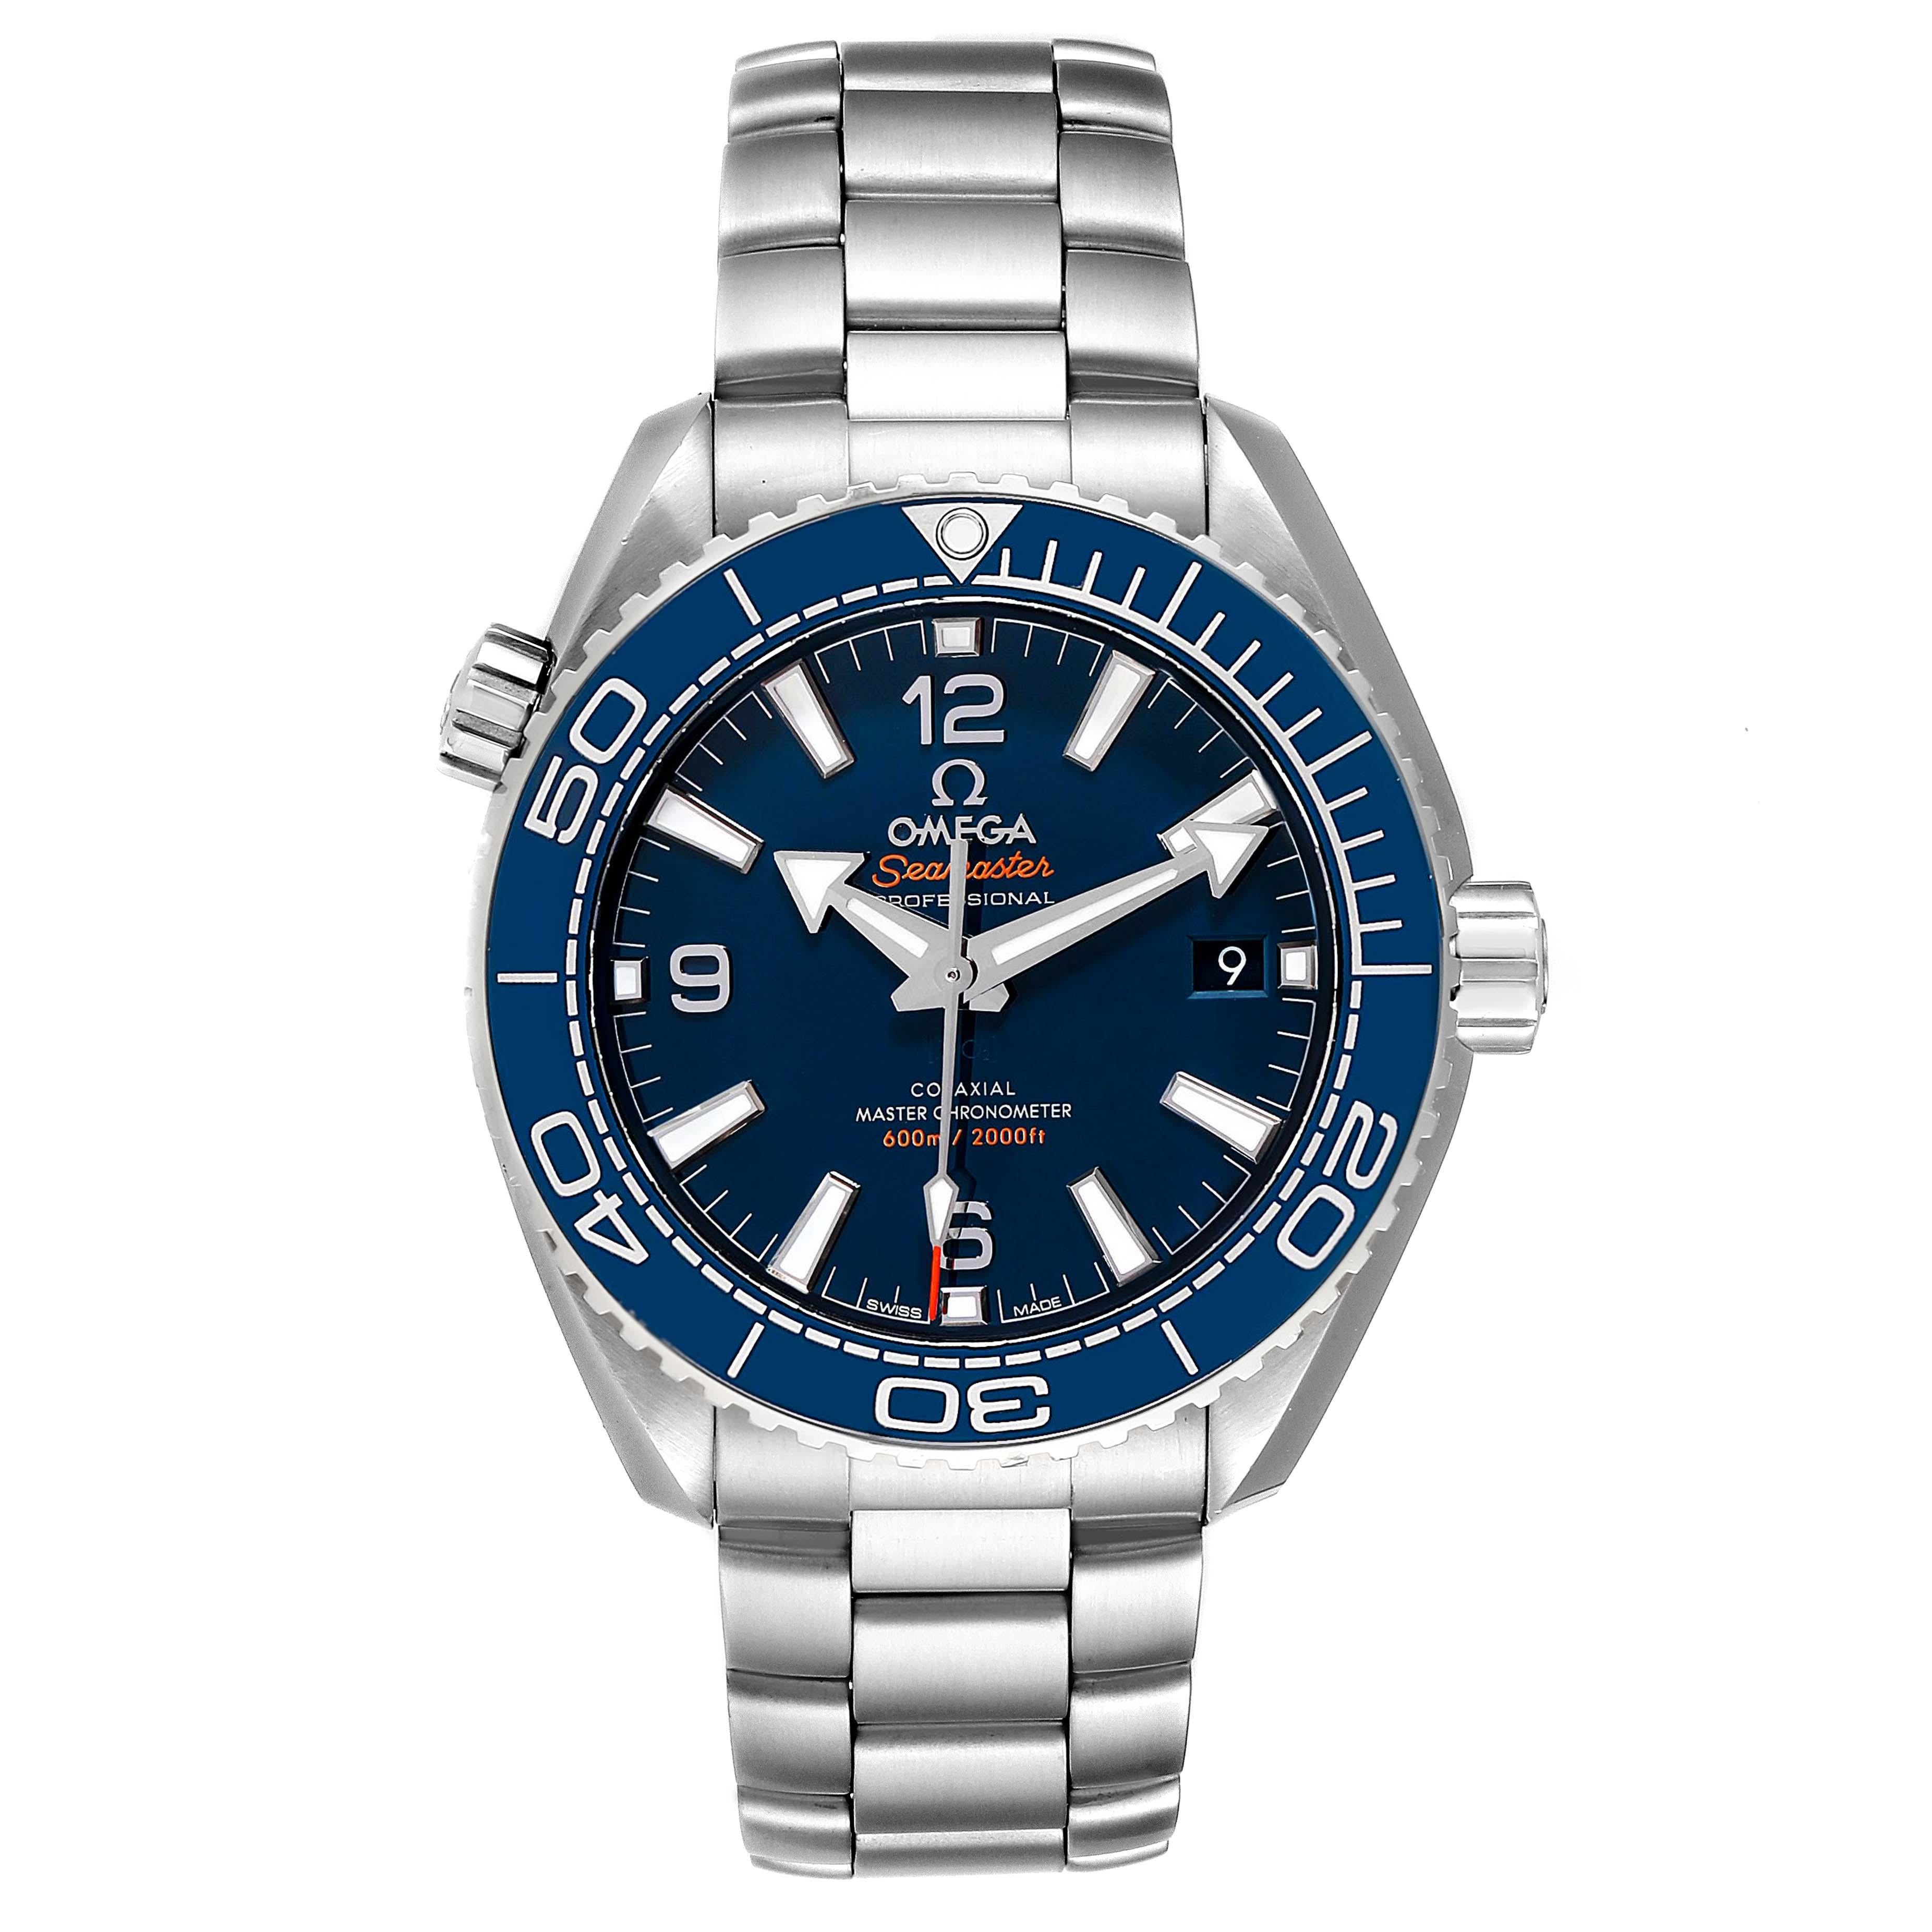 Omega Seamaster Planet Ocean Mens Watch 215.30.44.21.03.001 Box Card. Automatic self-winding movement with Co-Axial escapement.Certified Master Chronometer, approved by METAS,resistant to magnetic fields reaching 15,000 gauss.Free sprung-balance